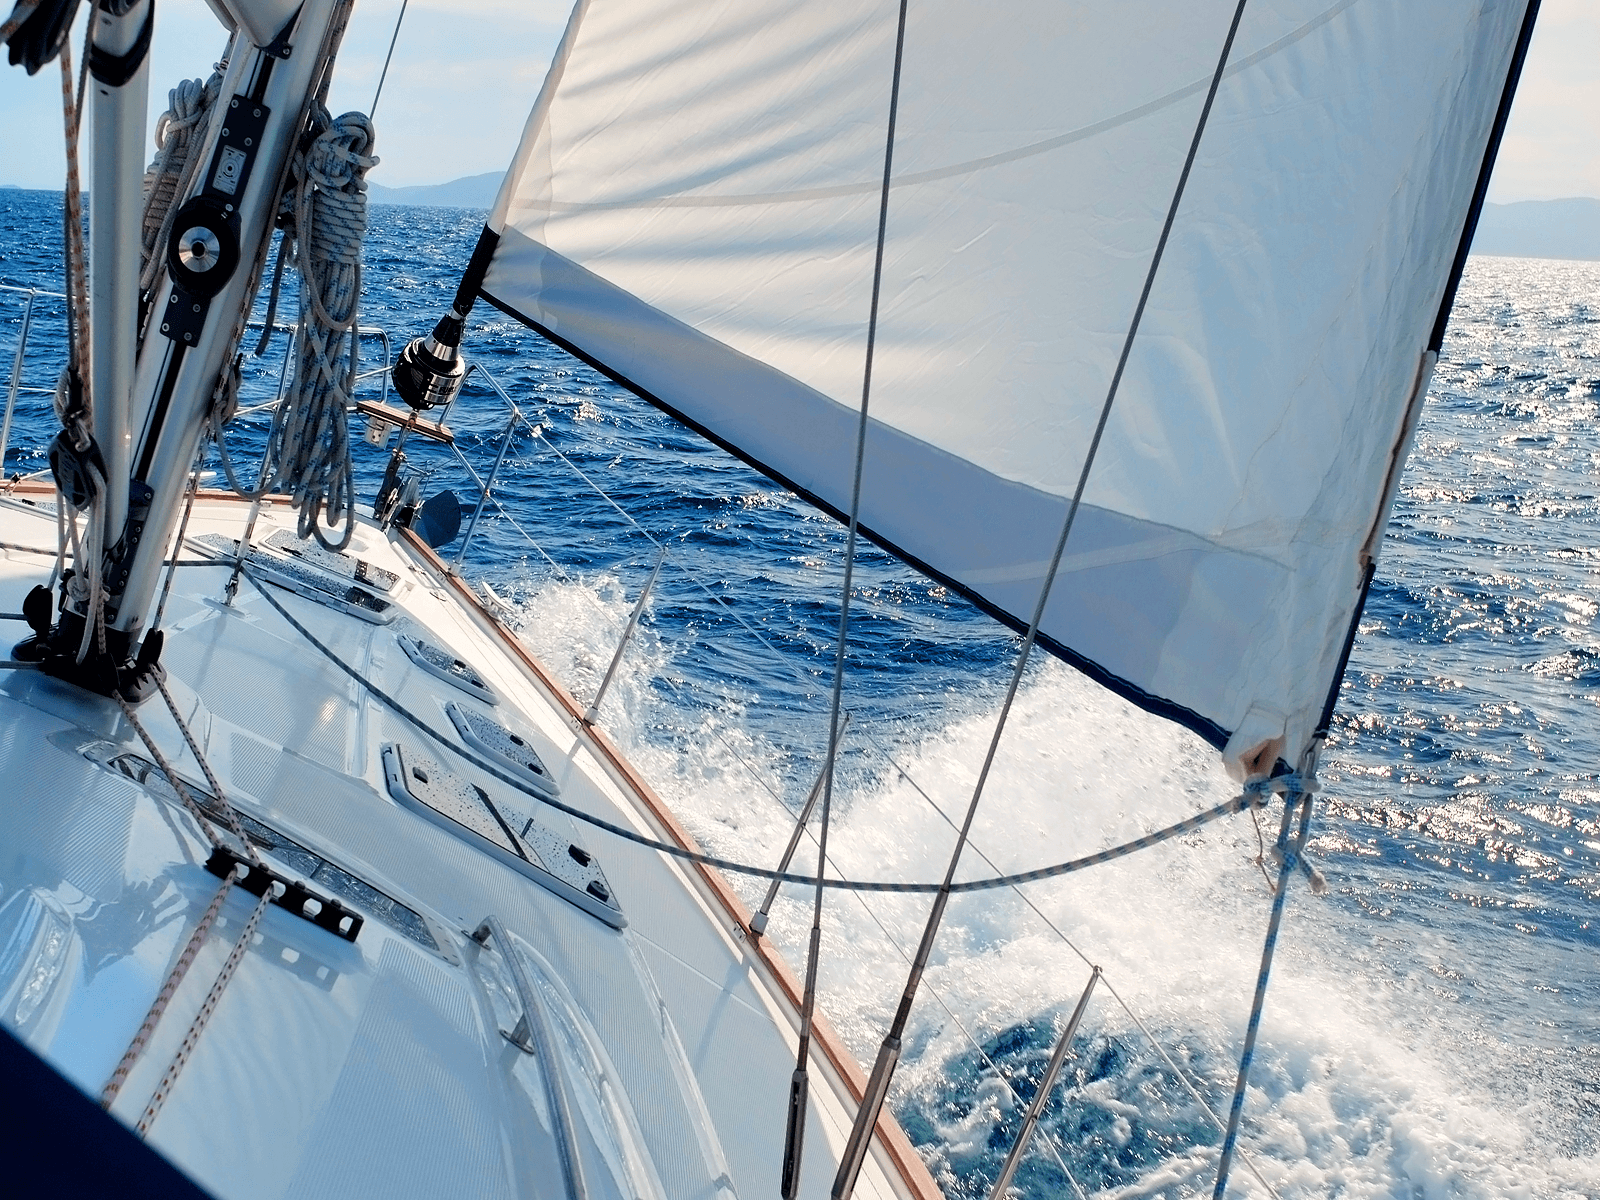 Summer Sailing wallpapers – The Republican Stellar Record of